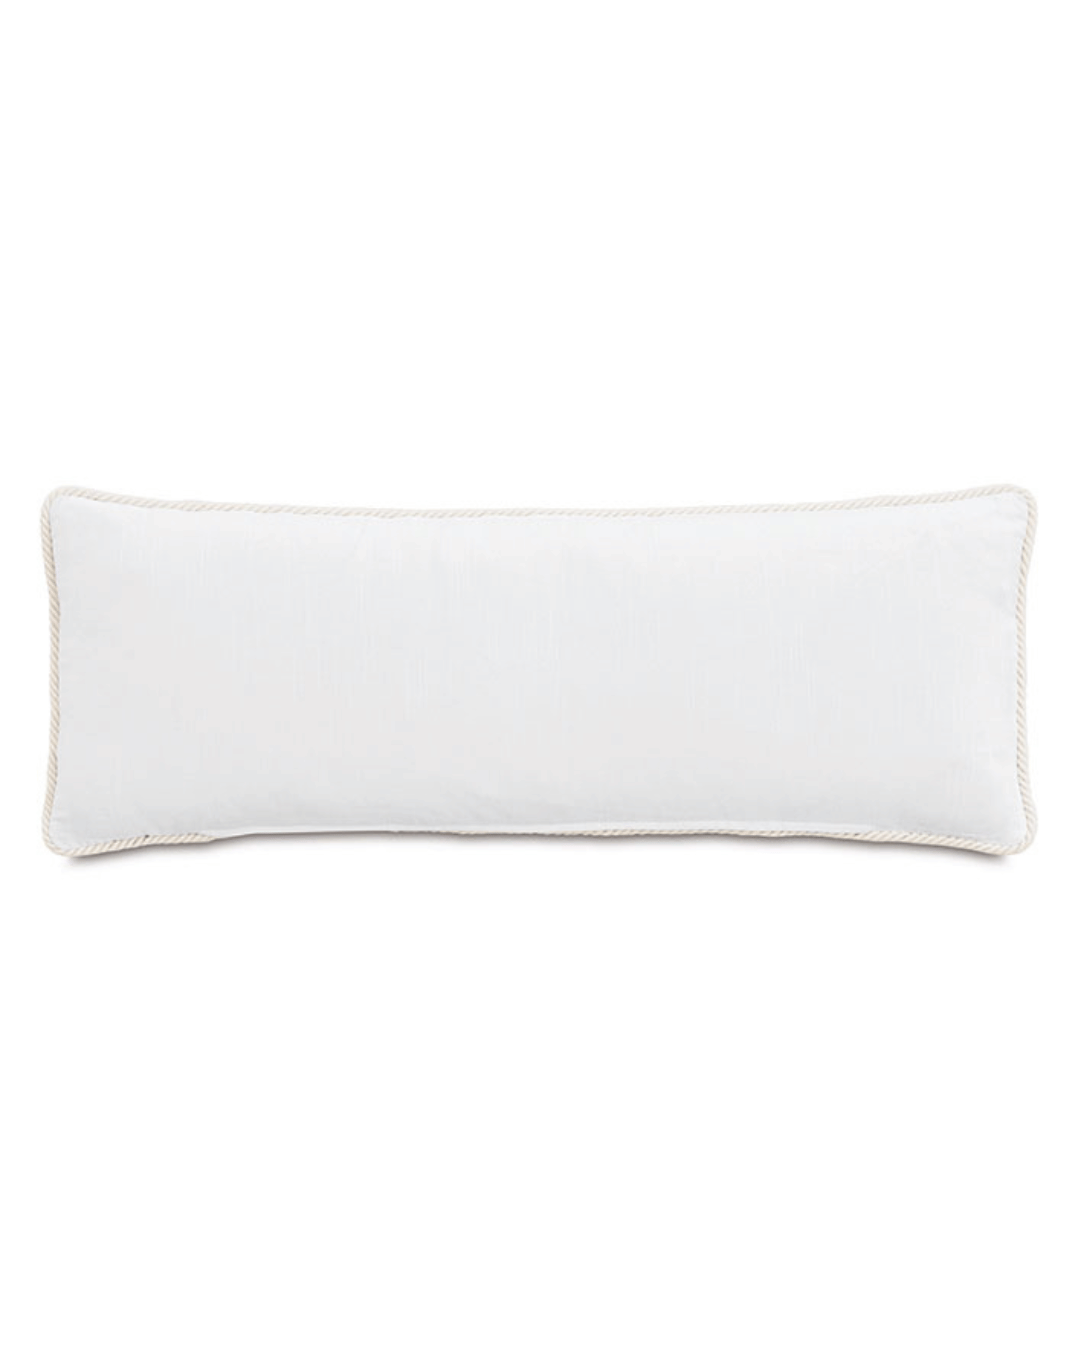 A long, rectangular white Casa Chenille Pillow with a subtle tan piping around the edges, displayed against a plain background, perfect for a Scottsdale Arizona bungalow by Eastern Accents.